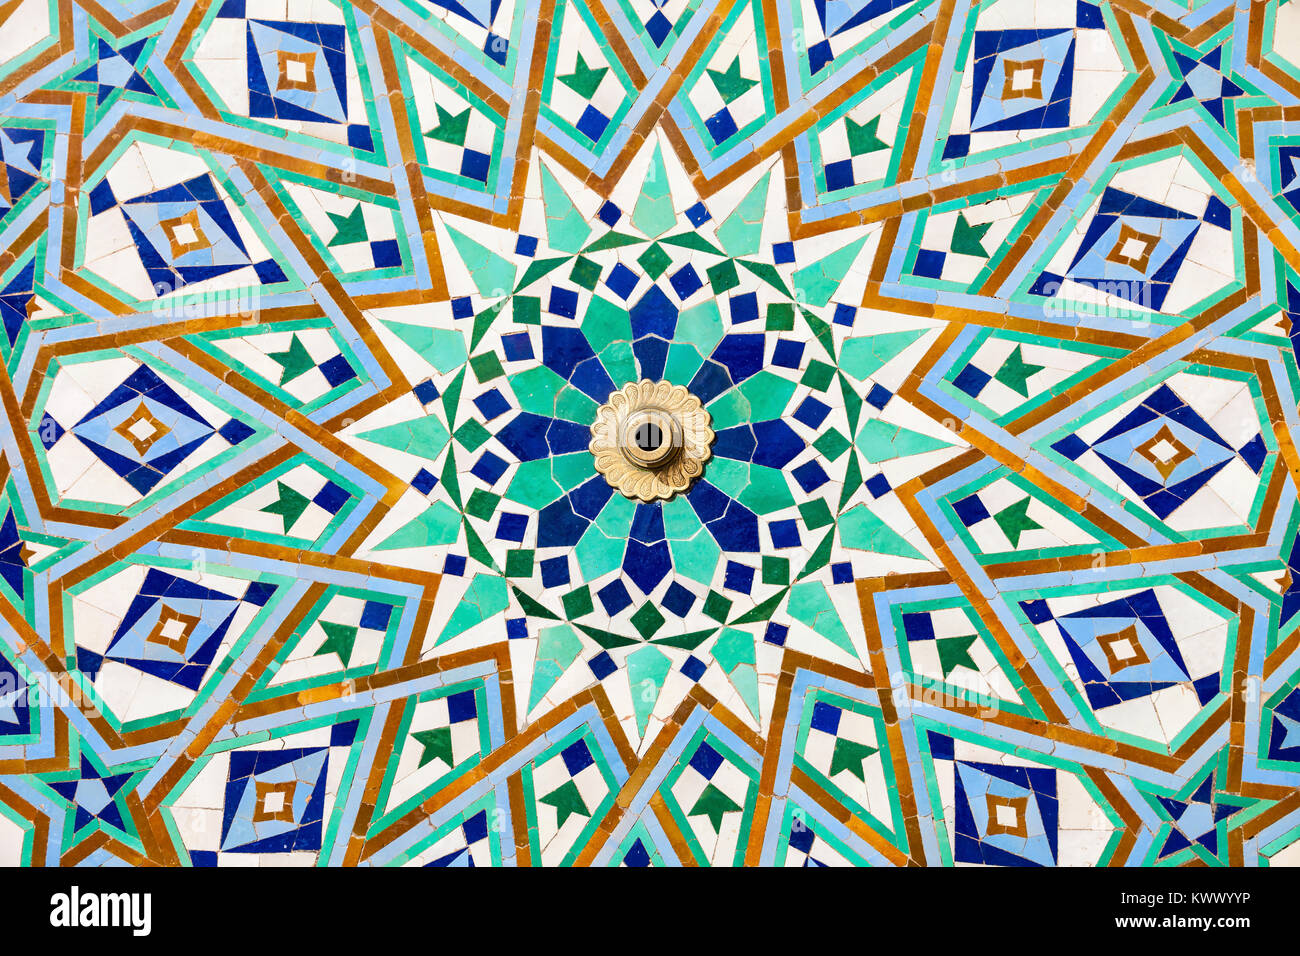 The Hassan II Mosque exterior pattern in Casablanca, Morocco Stock Photo